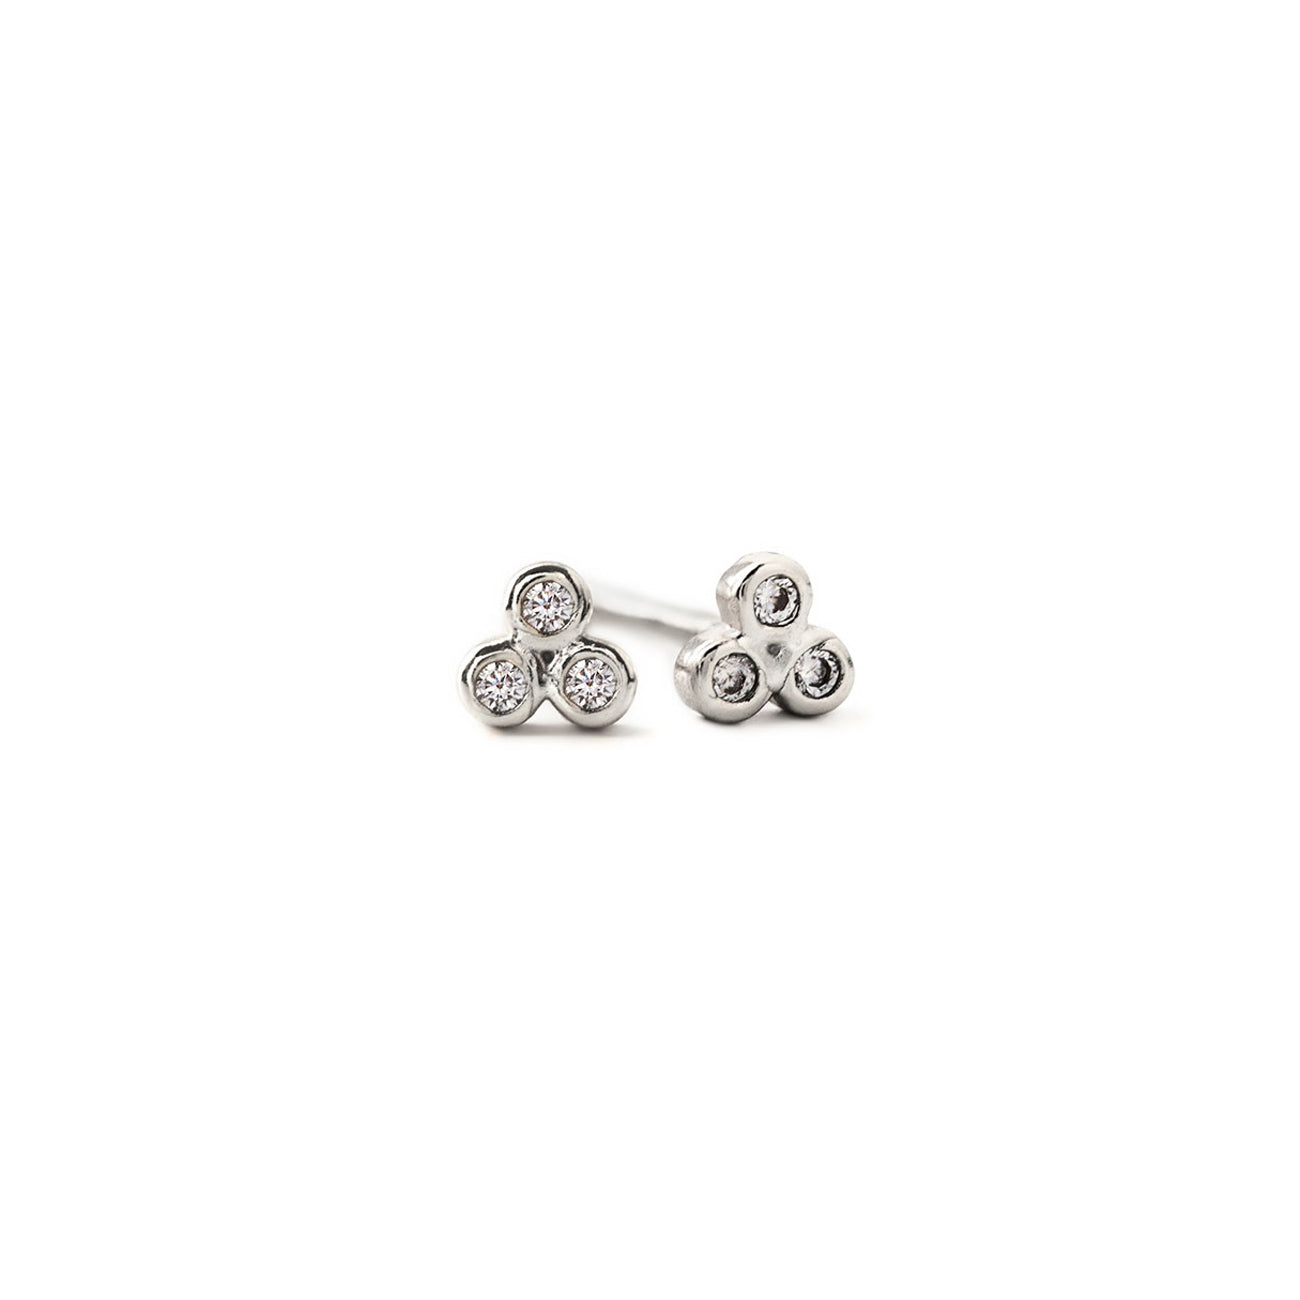 3-prong Diamond Solitaire Stud Earrings Tiny Diamond Studs Dainty  Minimalist Silver Studs Sterling Silver Studs BE1682 